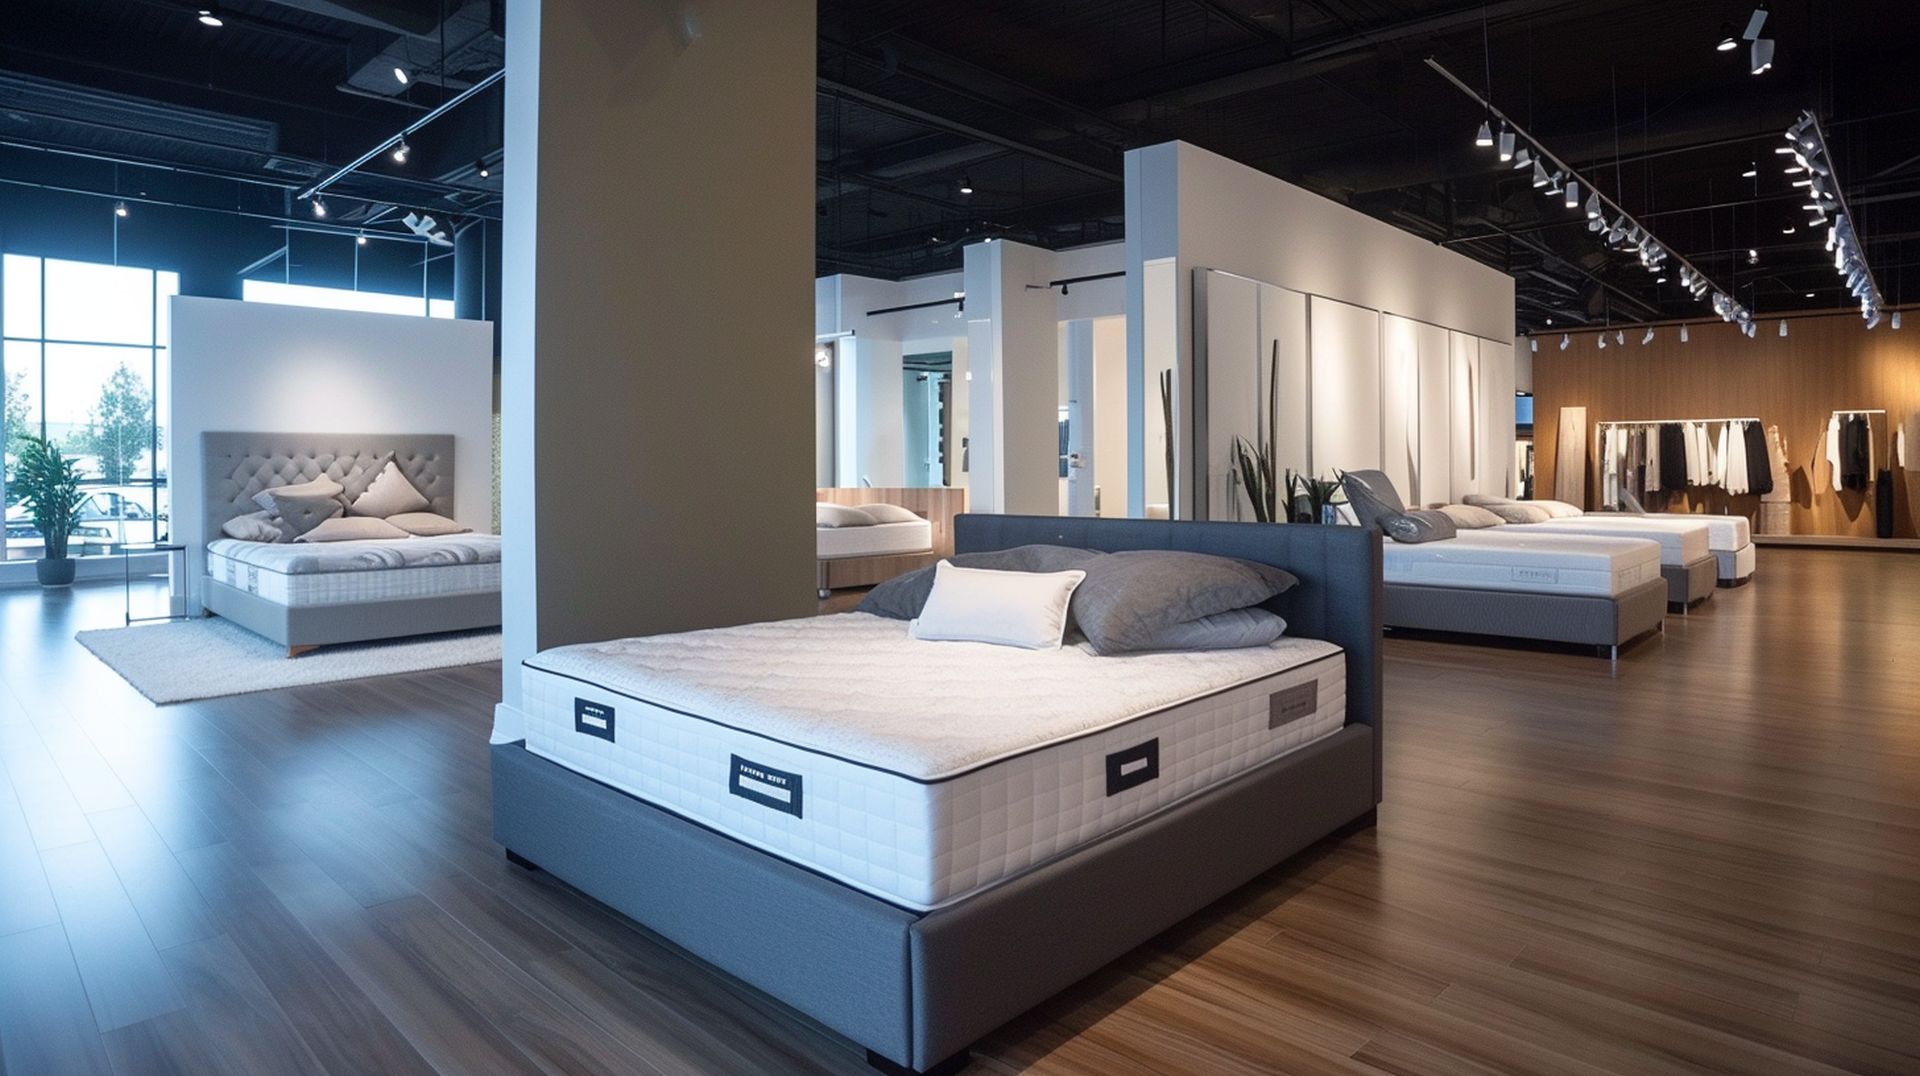 If you're looking for a new bed, mattress stores in Smyrna offer the best customer and delivery service, financing, and warranties in Georgia